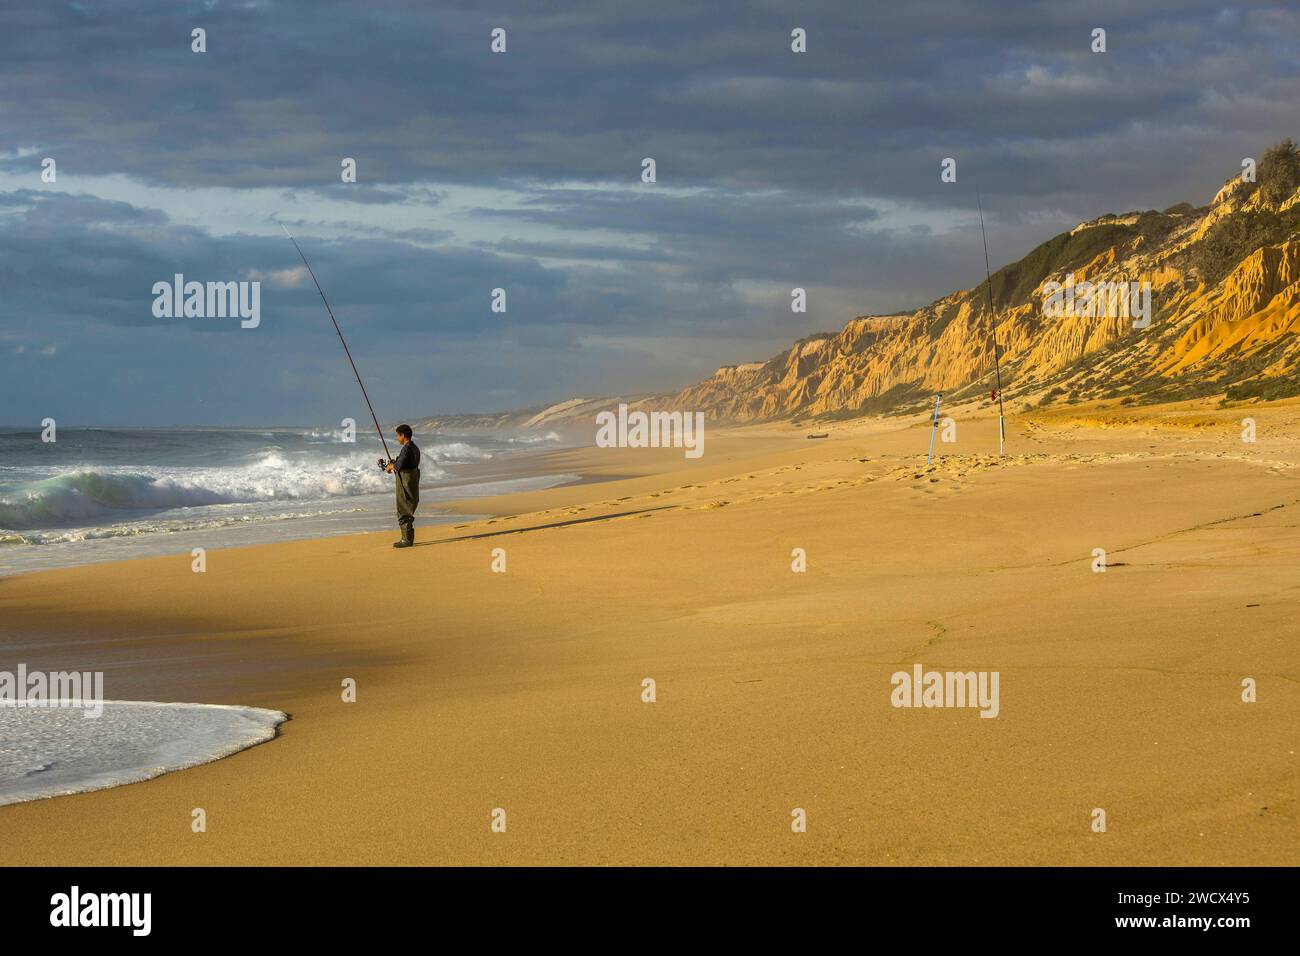 Portugal, Alentejo, Gale Fontainhas beach, fisherman casting fishing rod into the Atlantic Ocean on a beach flanked by ocher fossil cliffs five million years old Stock Photo